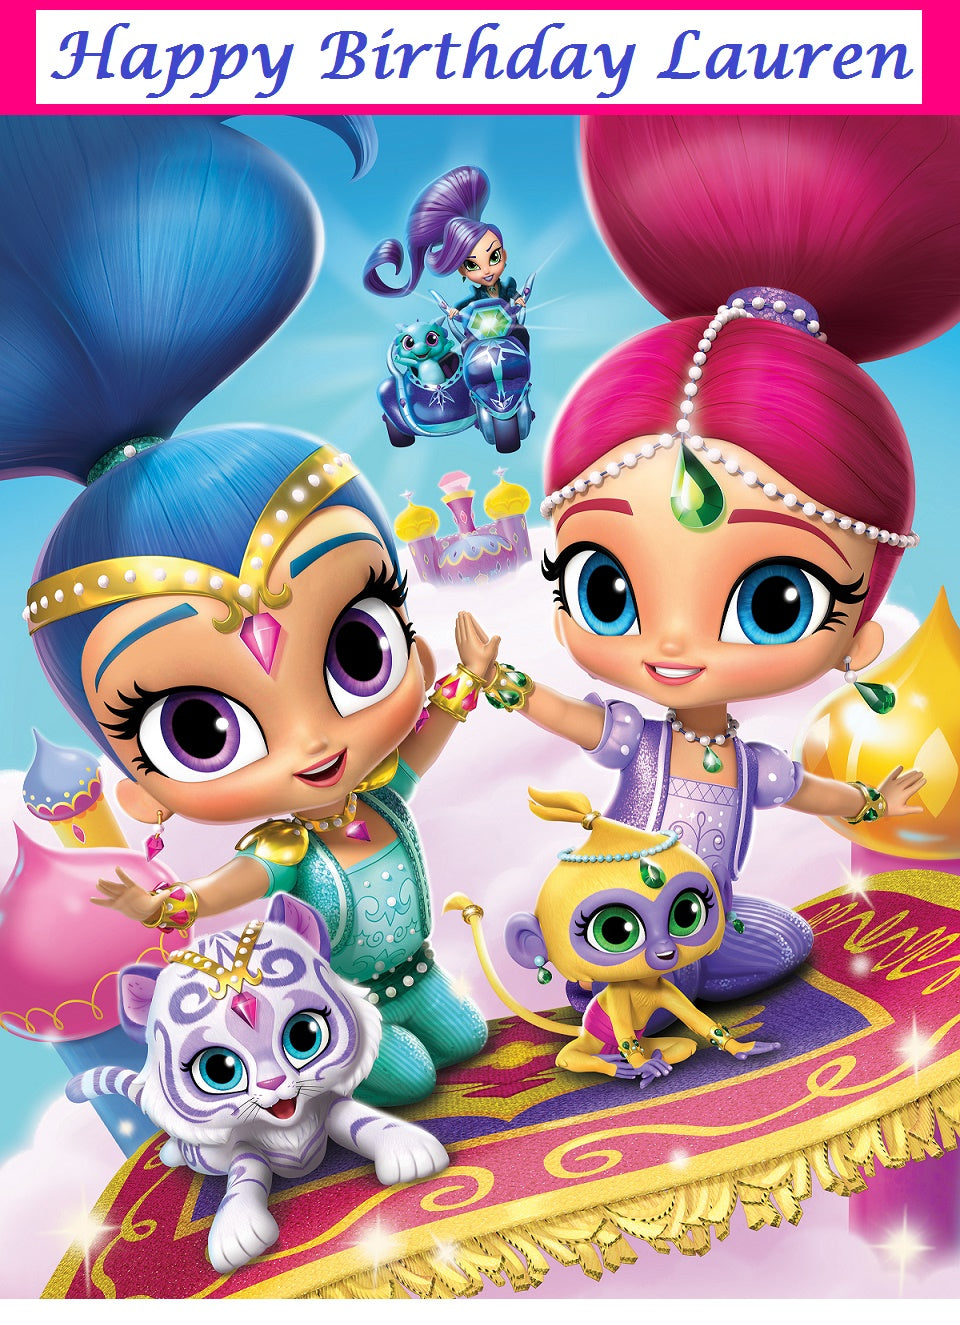 Shimmer and Shine Edible Cake Topper Decoration